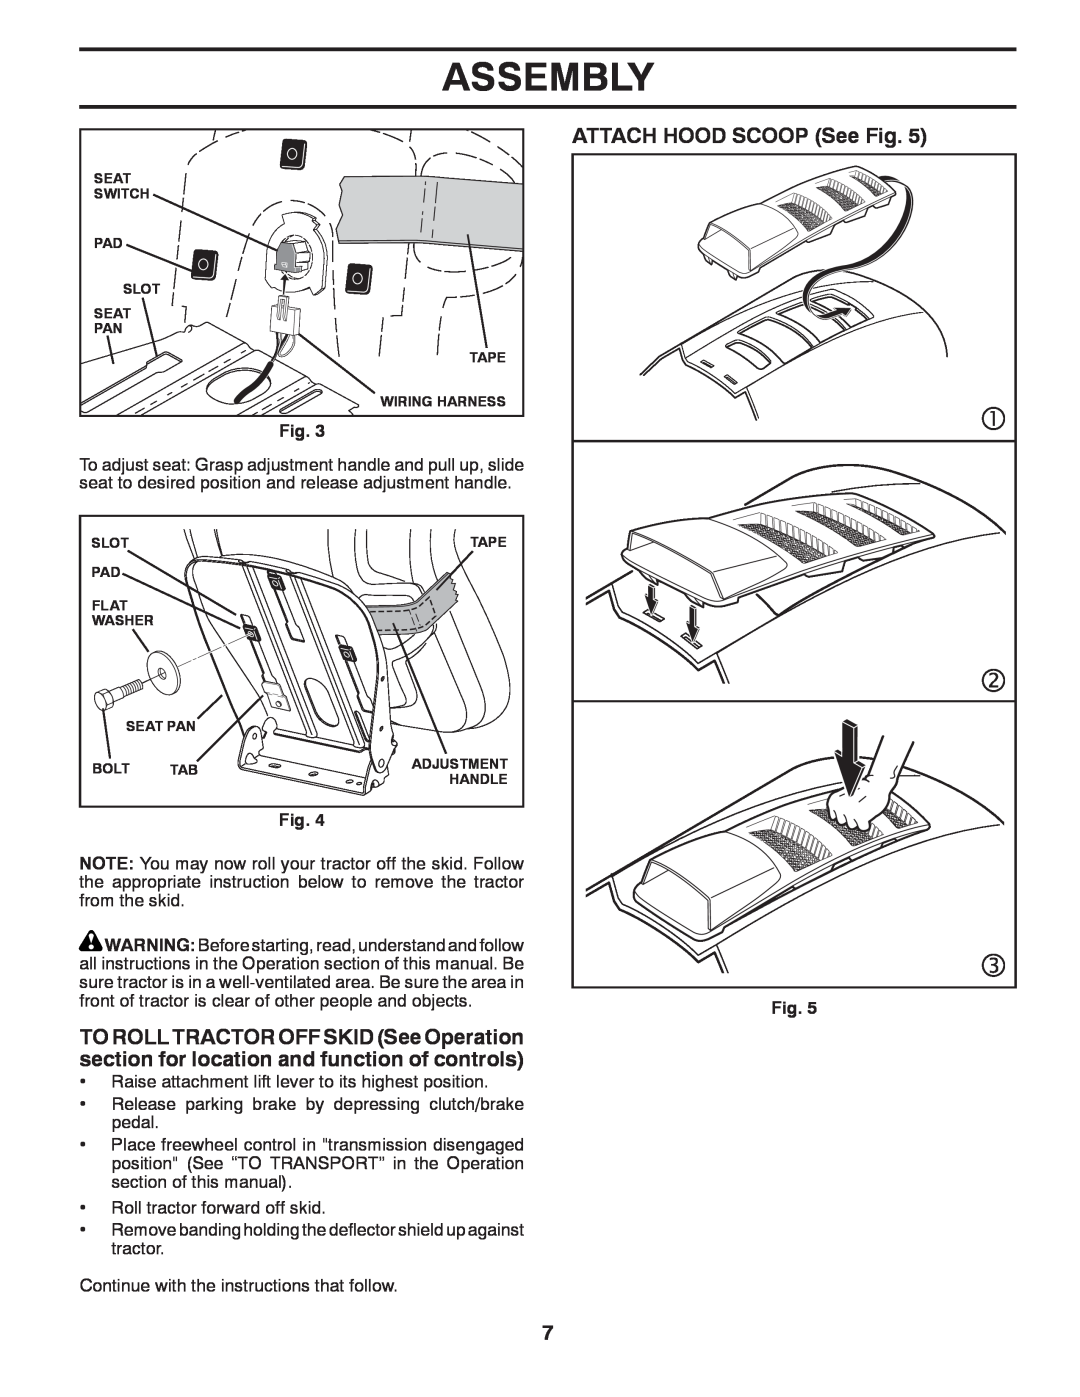 Husqvarna LTH1438 owner manual Assembly, ATTACH HOOD SCOOP See Fig 